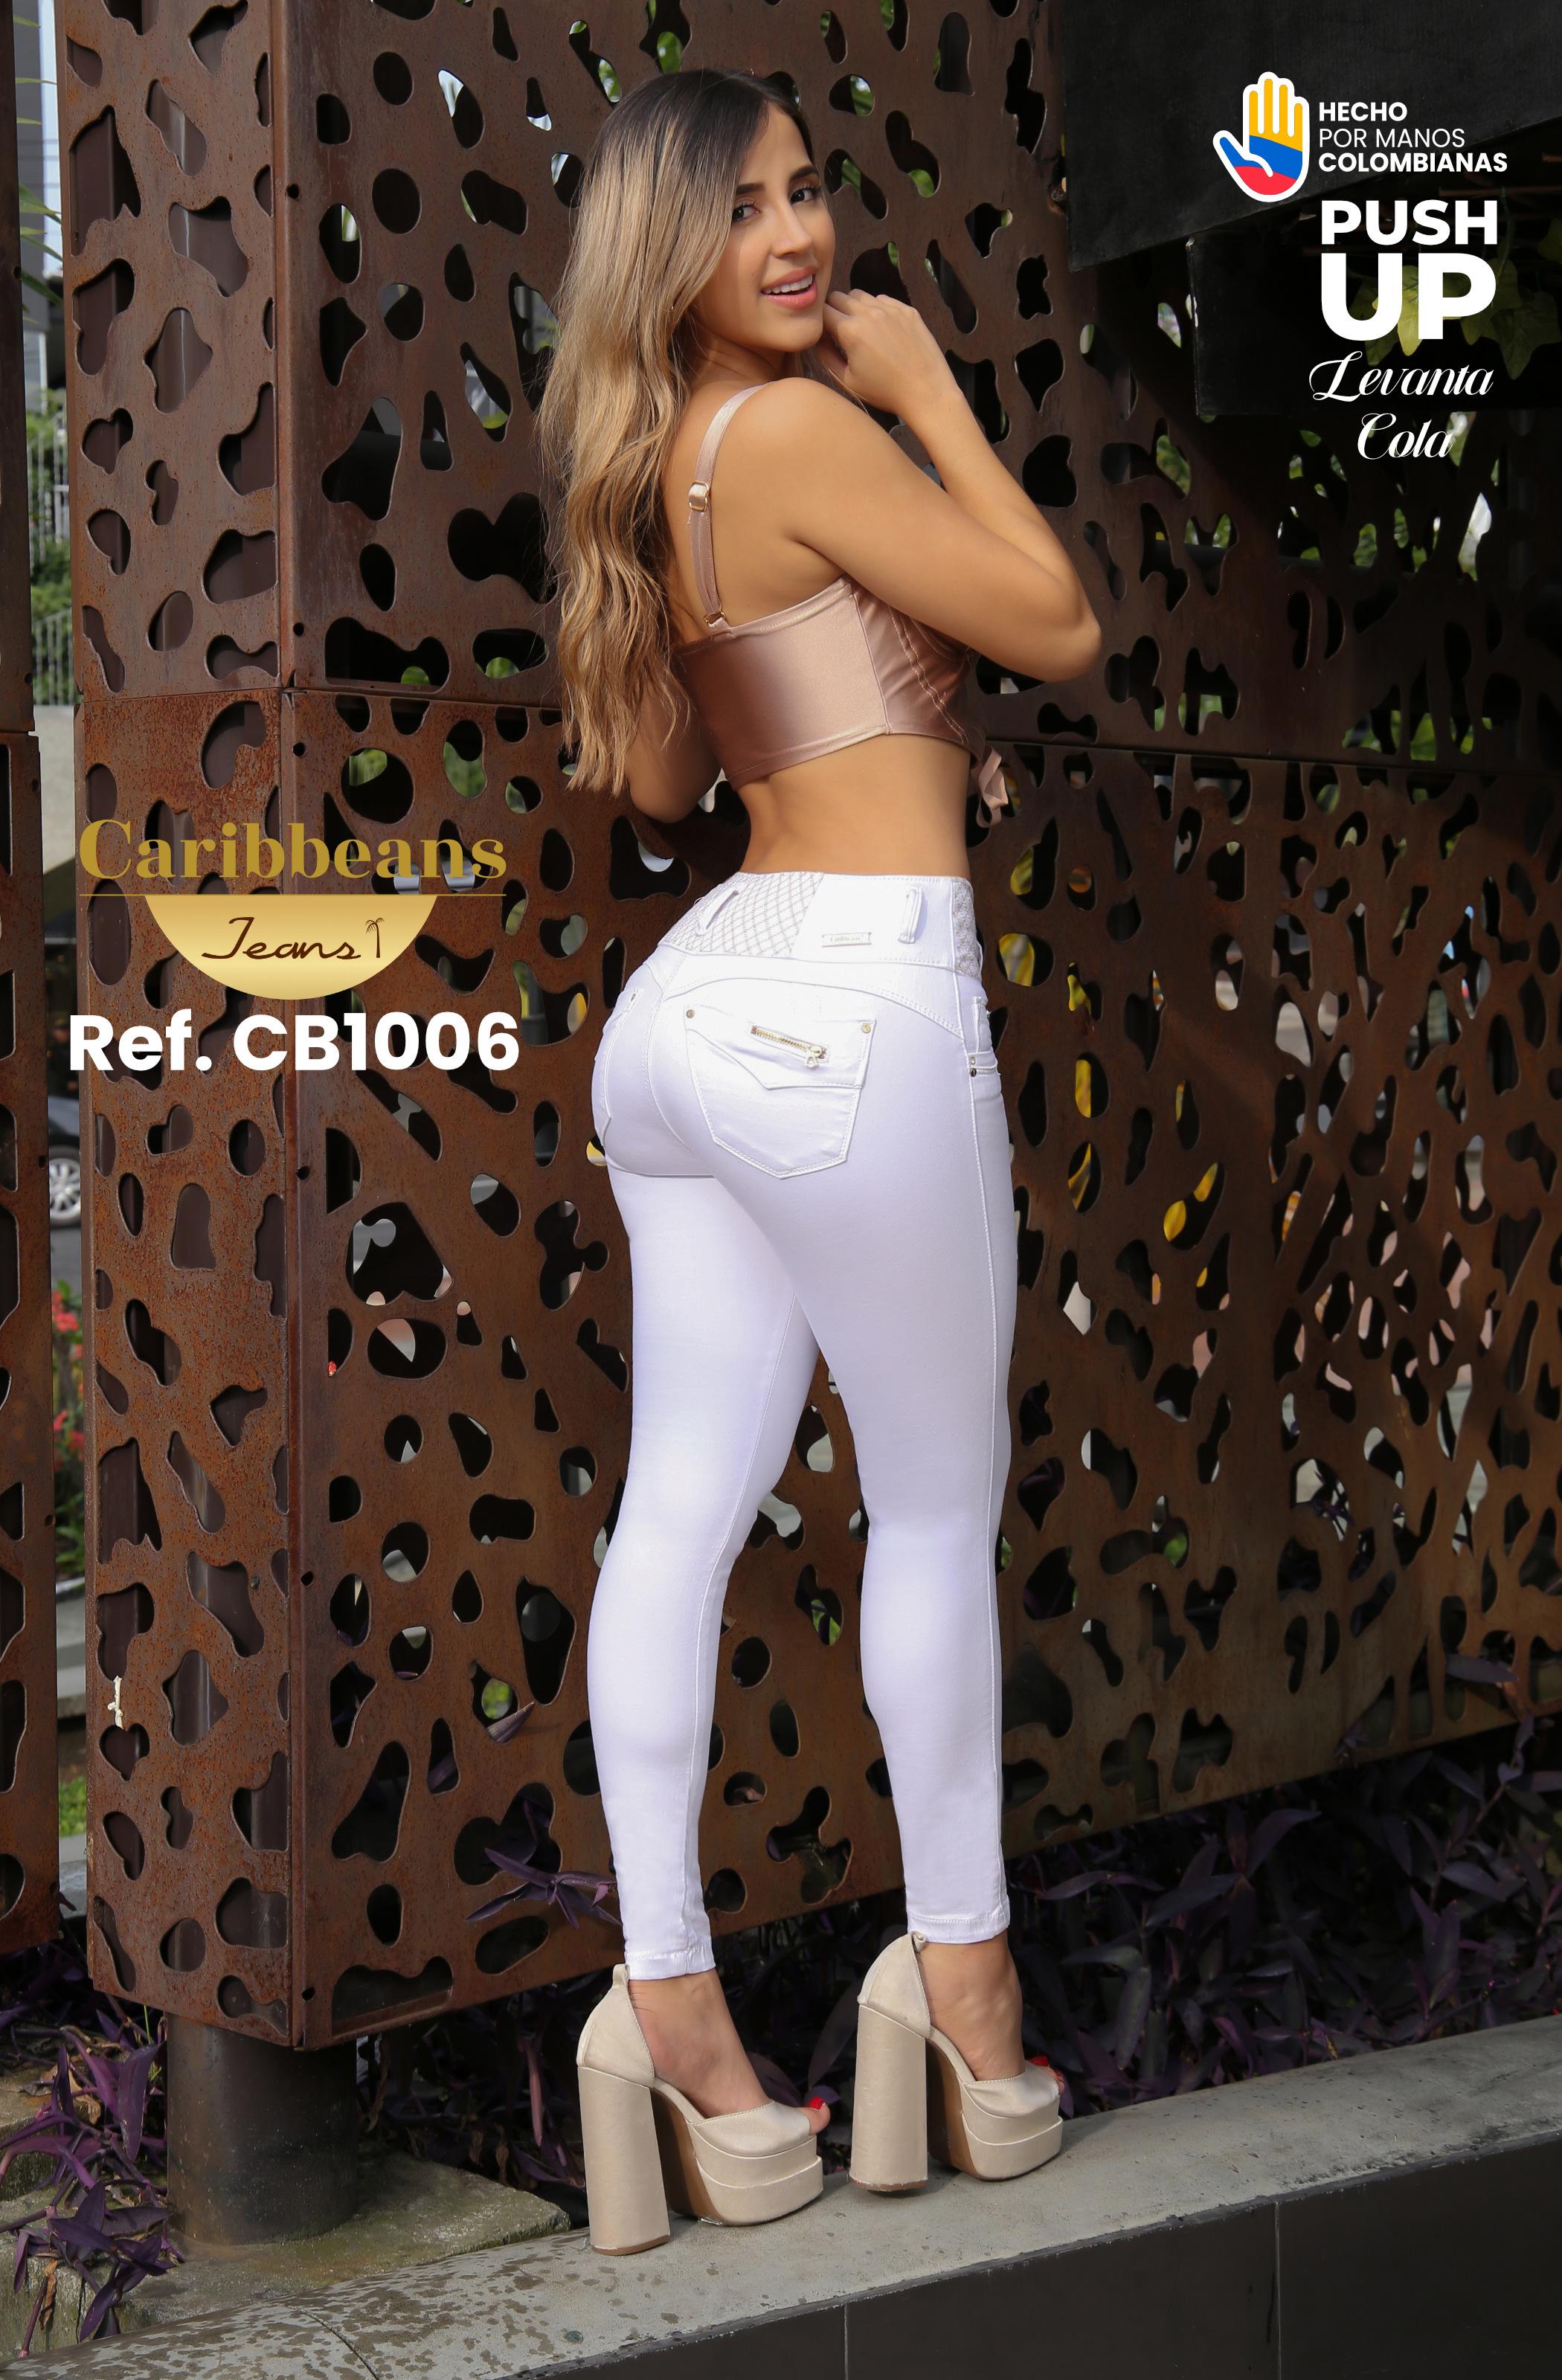 Colombian Push Up Jeans